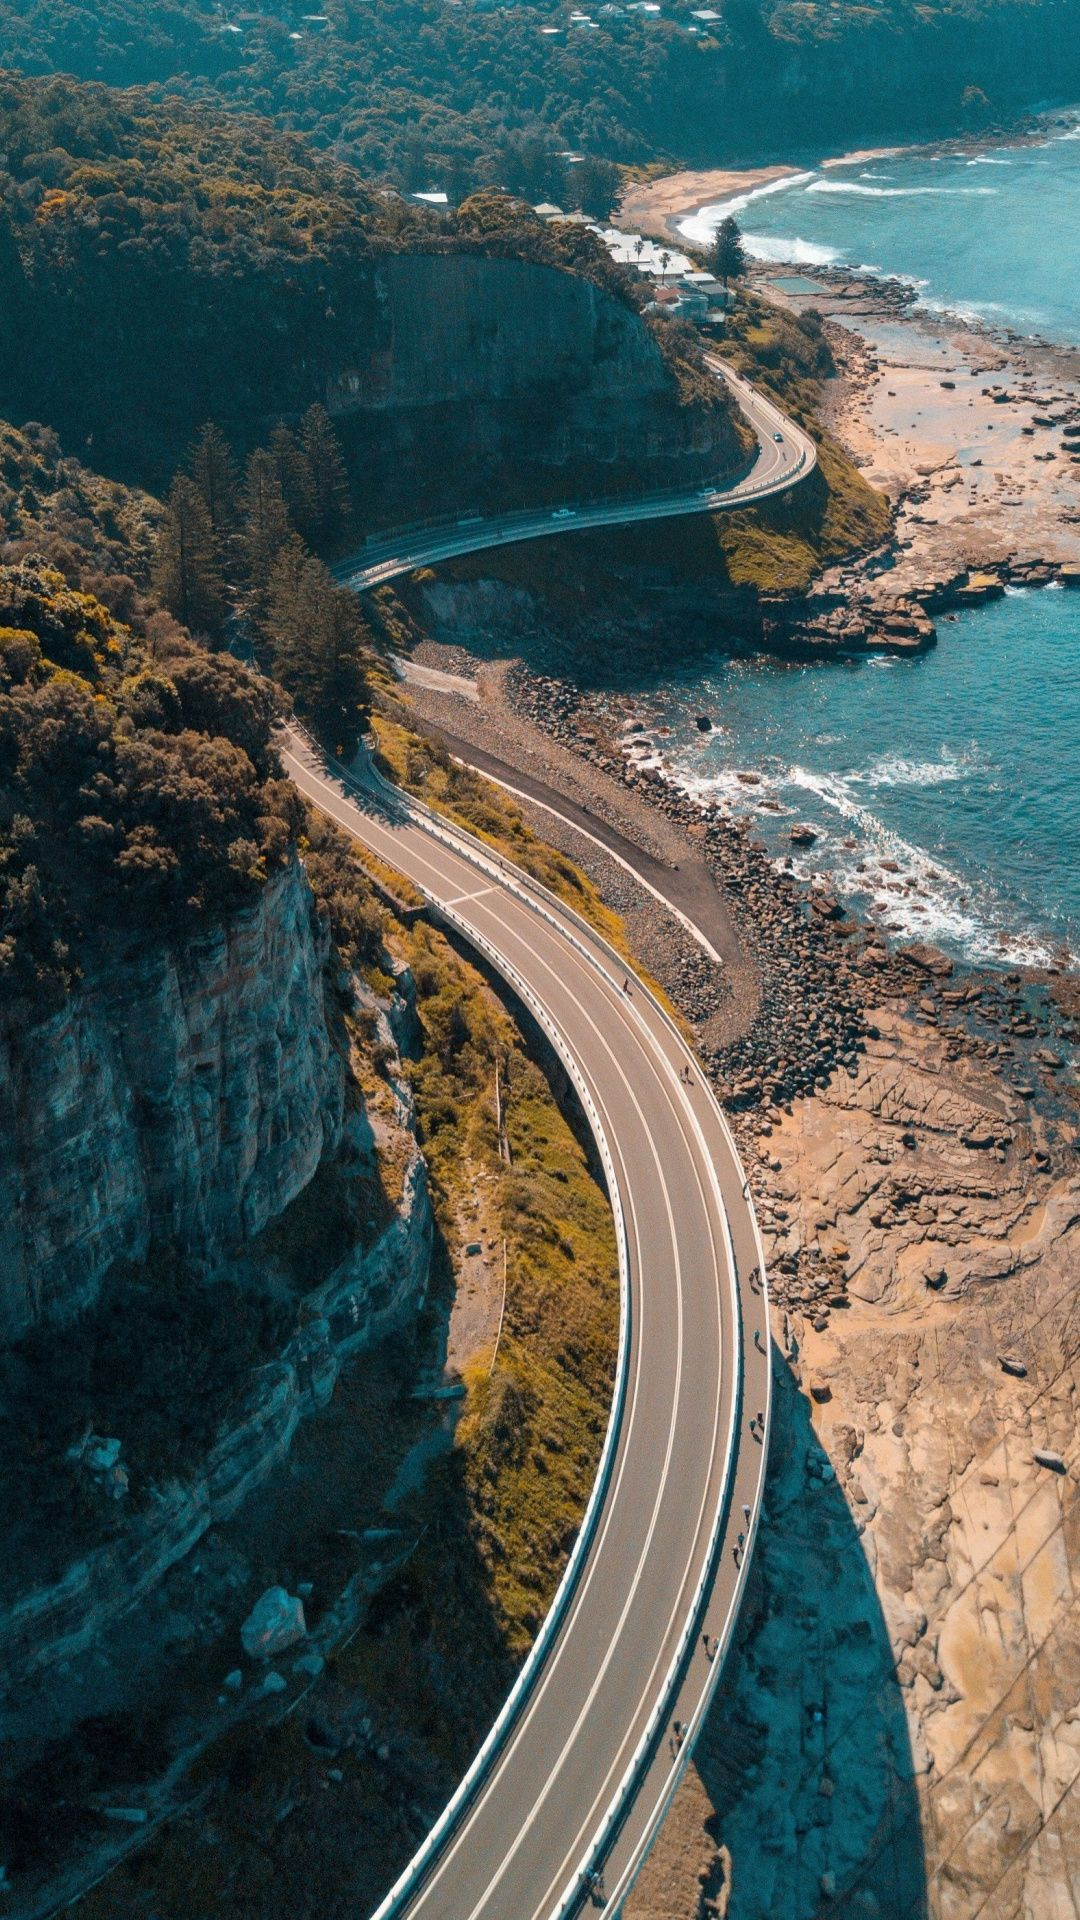 1080x1920 Sea Cliff Bridge aerial view highway 1080 x 1920 Wallpapers available for free download. | Australian road trip, Cool places to visit, Oceania travel